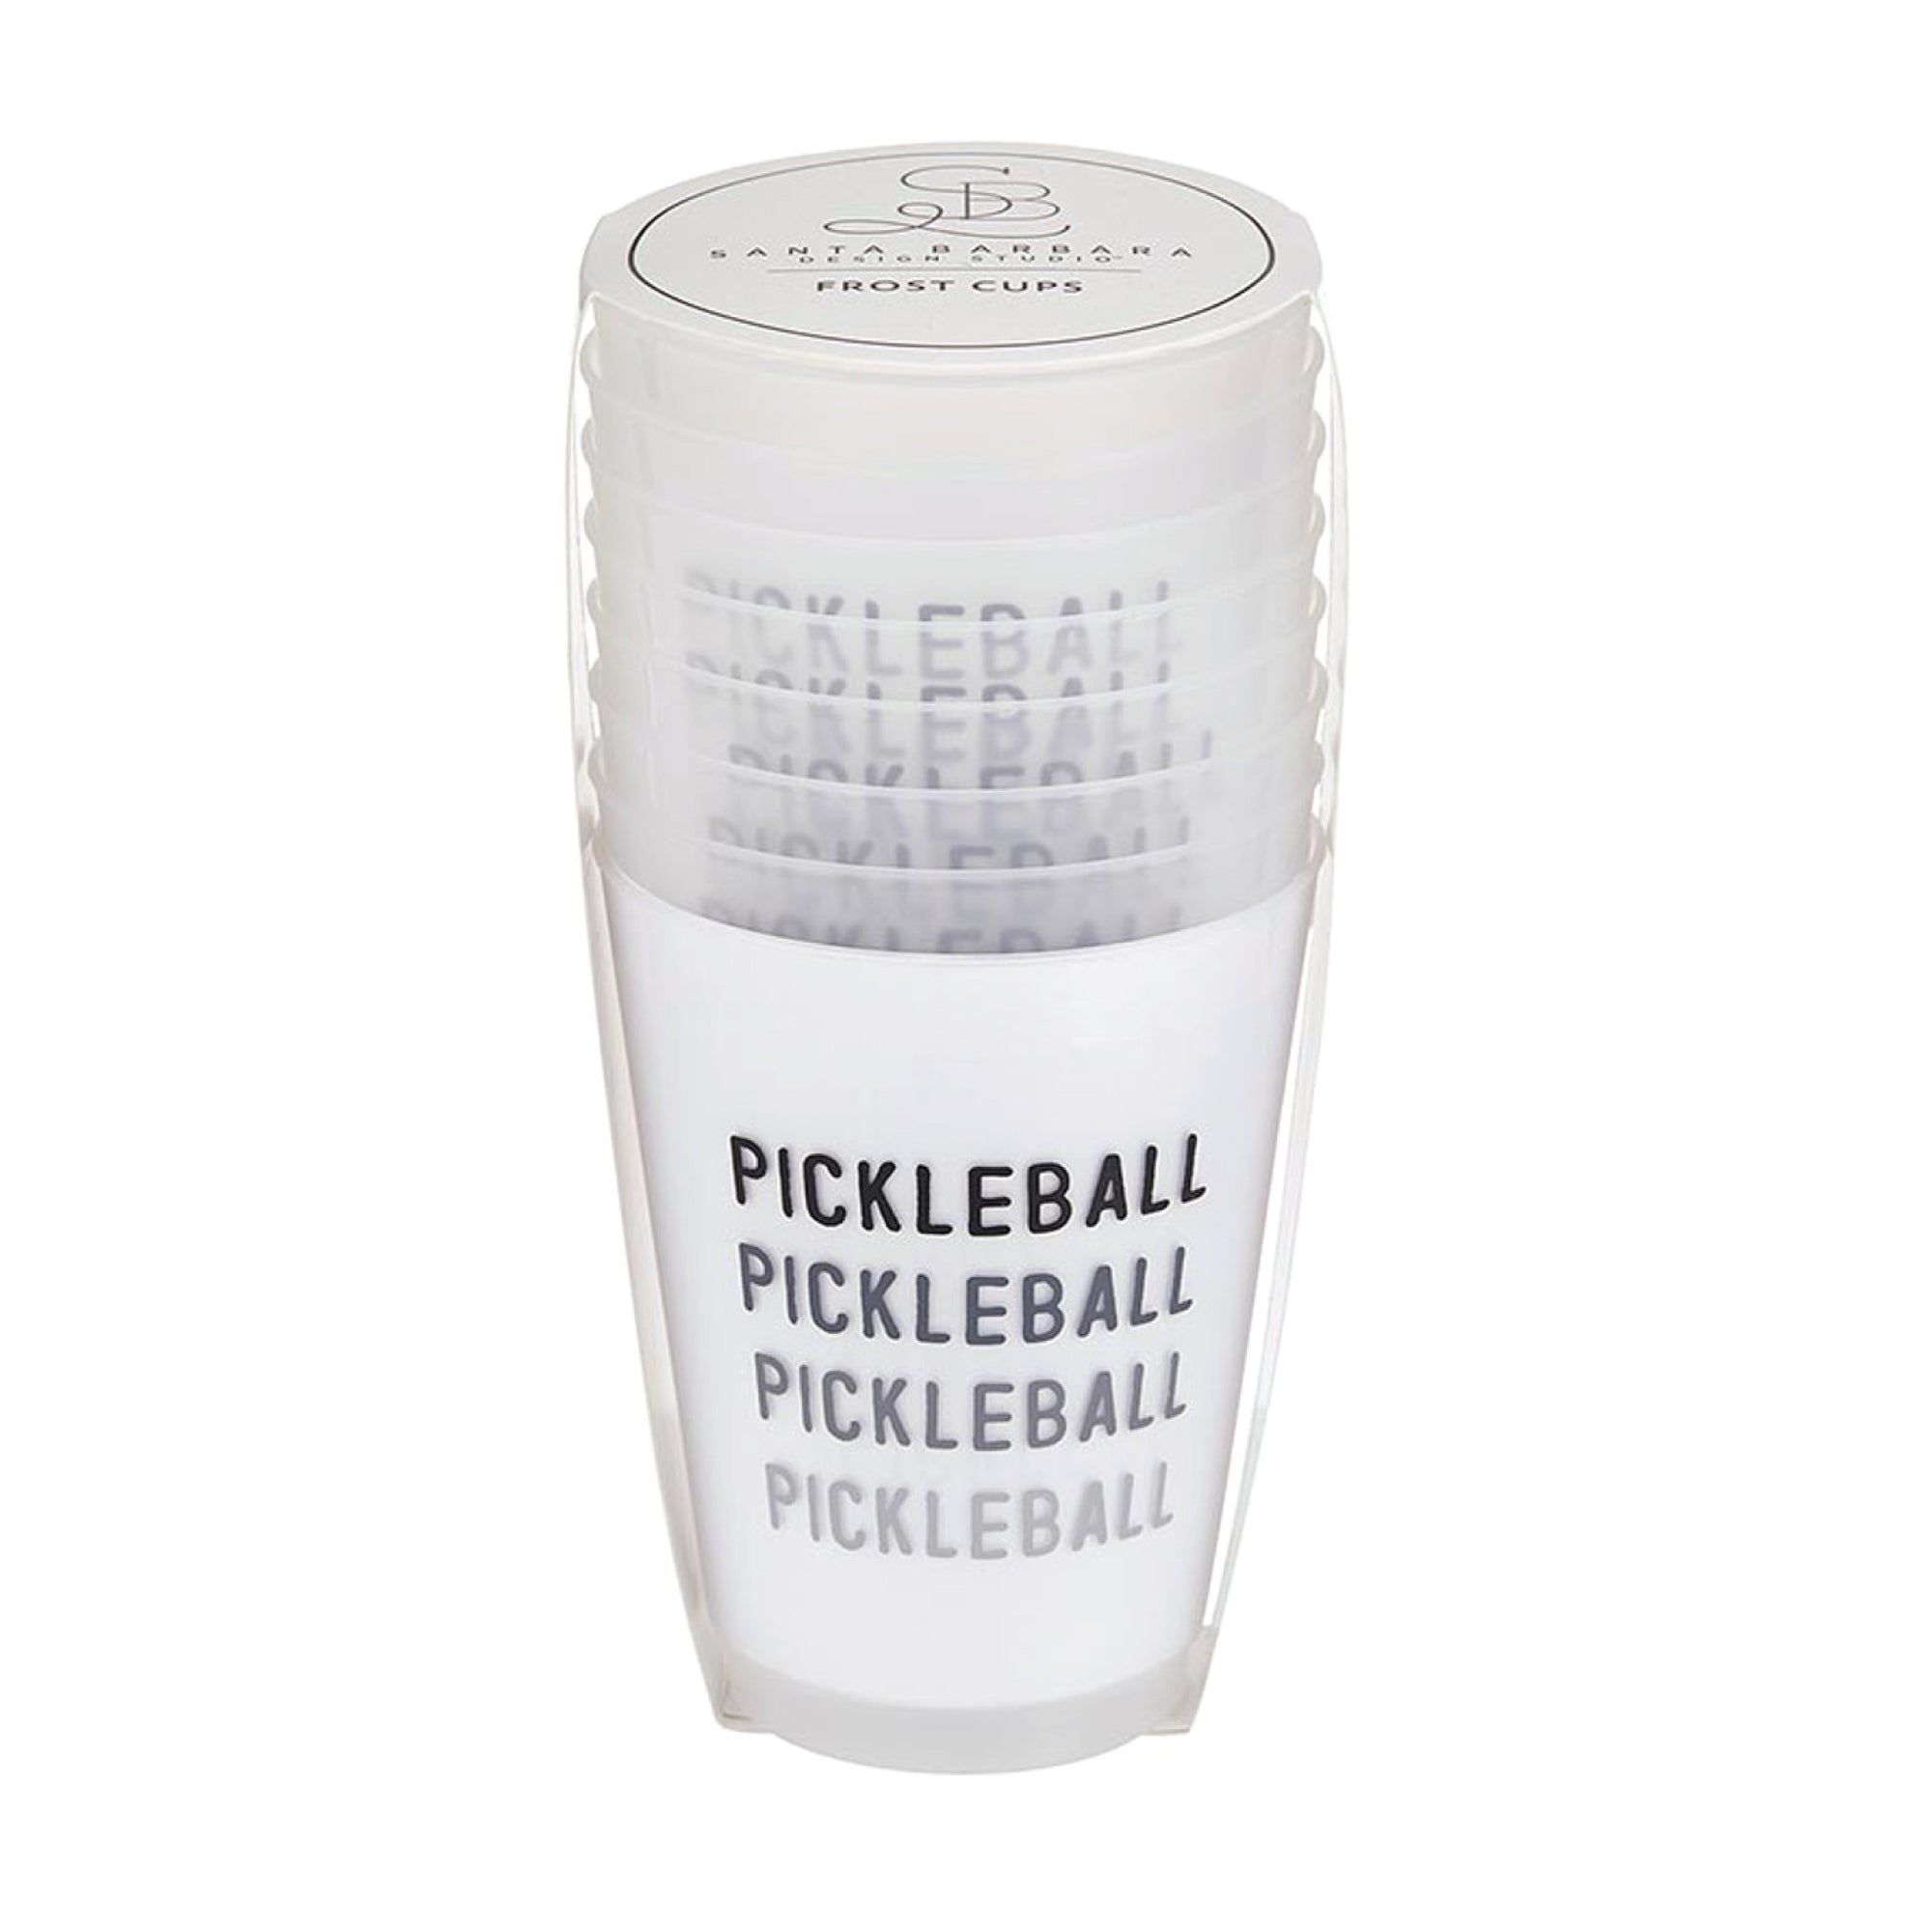 Pickleball Frosted Plastic Cups 8ct | The Party Darling